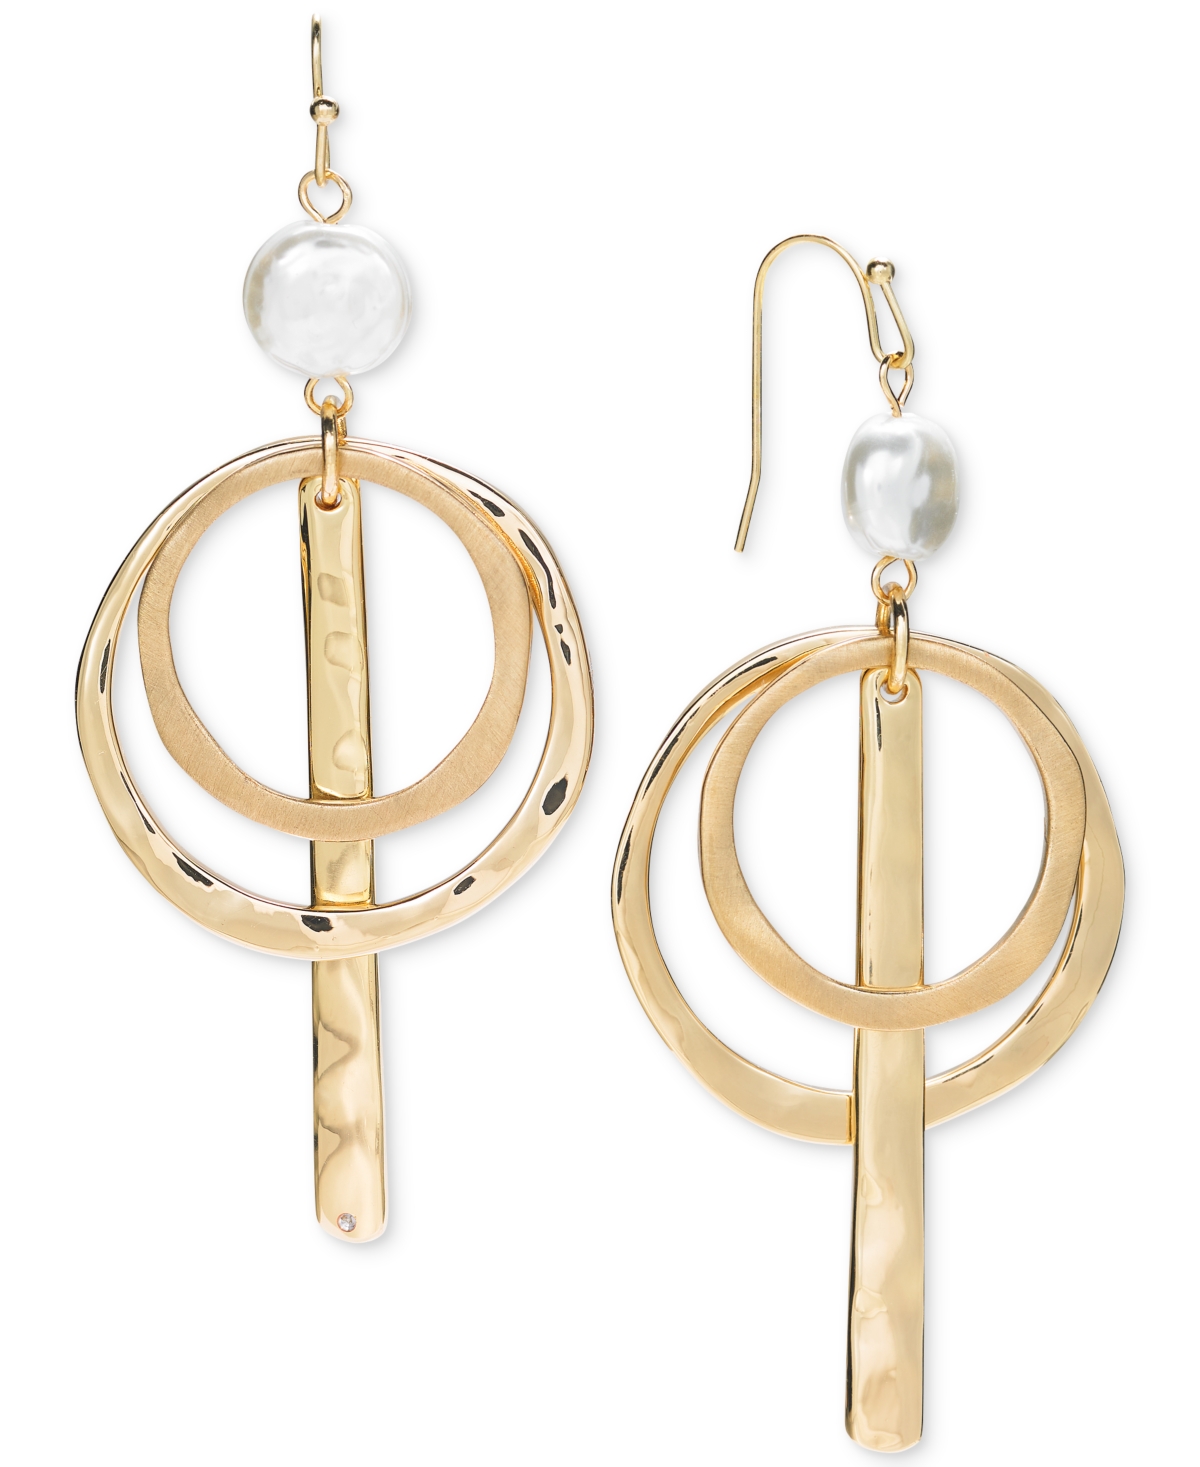 Gold-Tone Circular Linear Drop Earrings, Created for Macy's - Gold